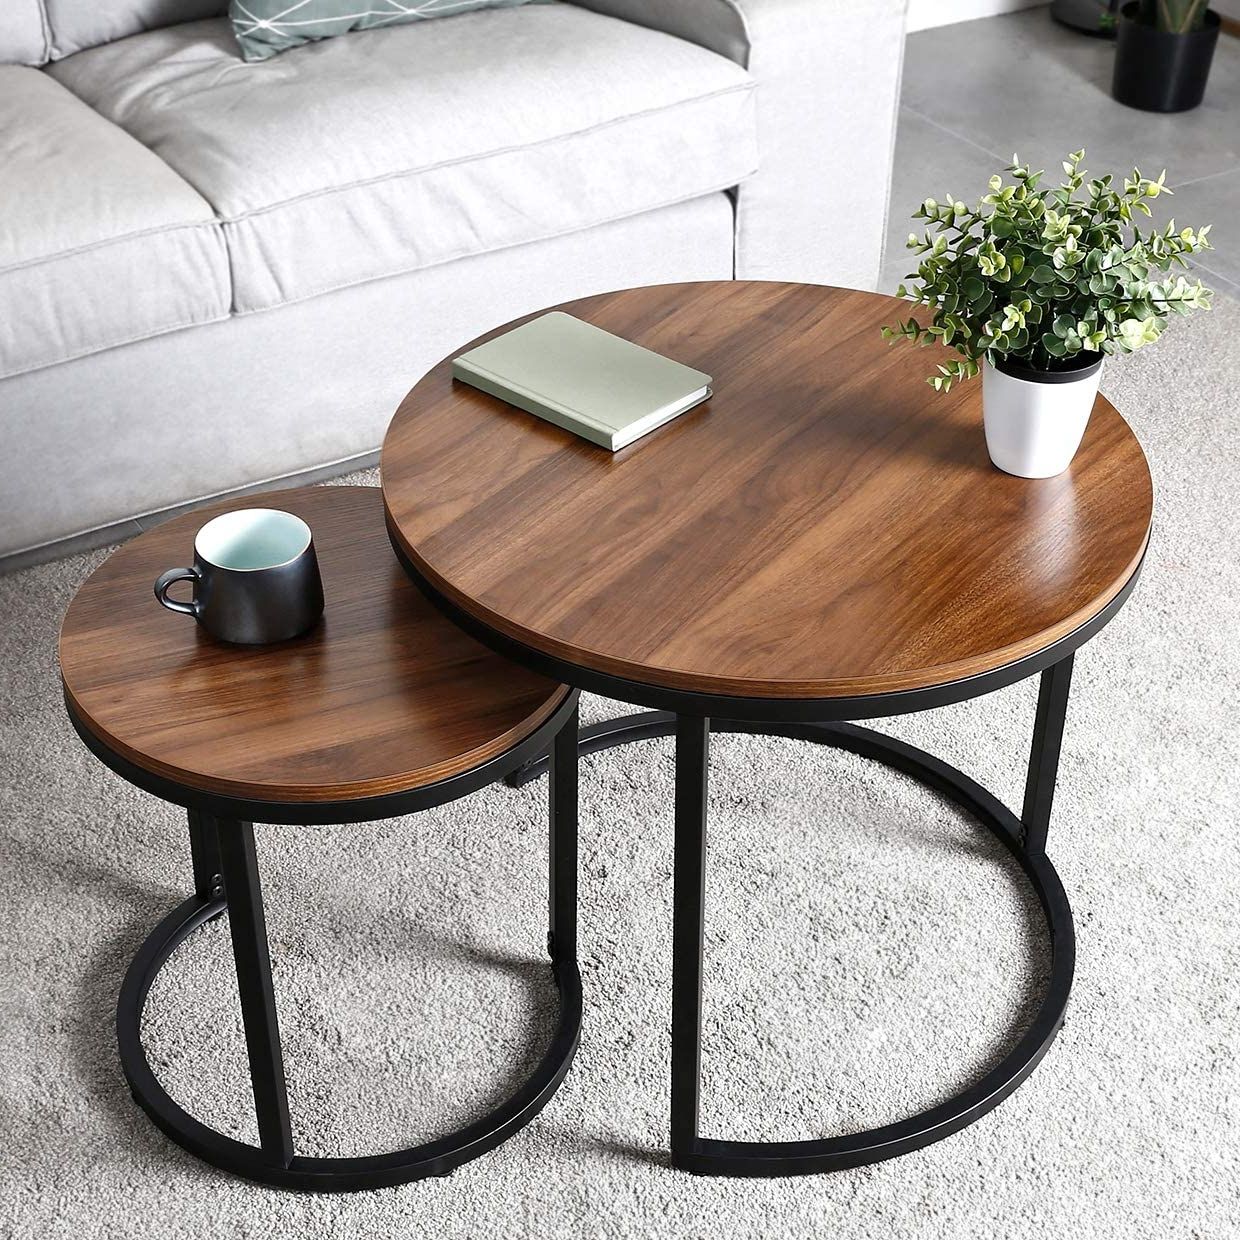 Amzdeal Round Nesting Coffee Table Set, 2 Piece Within Most Up To Date Round Coffee Tables (View 1 of 20)